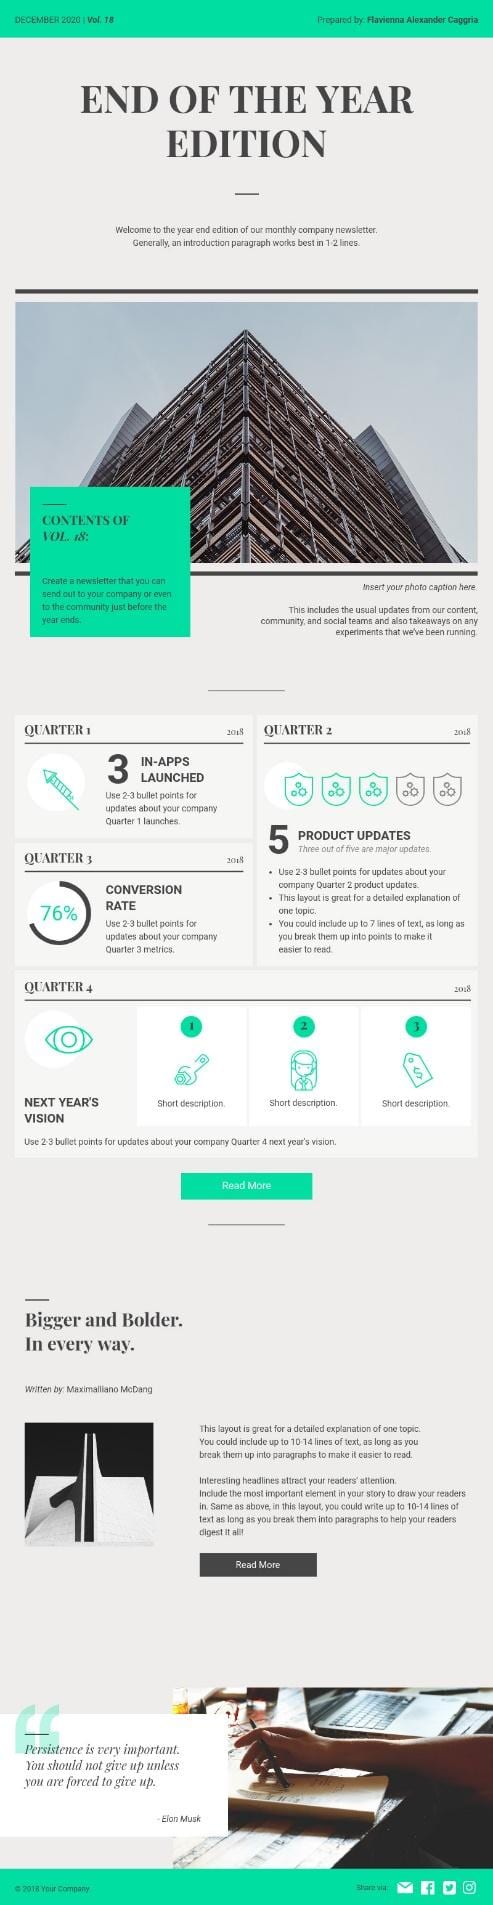 12 Best Infographic Makers For Building An Infographic From Scratch